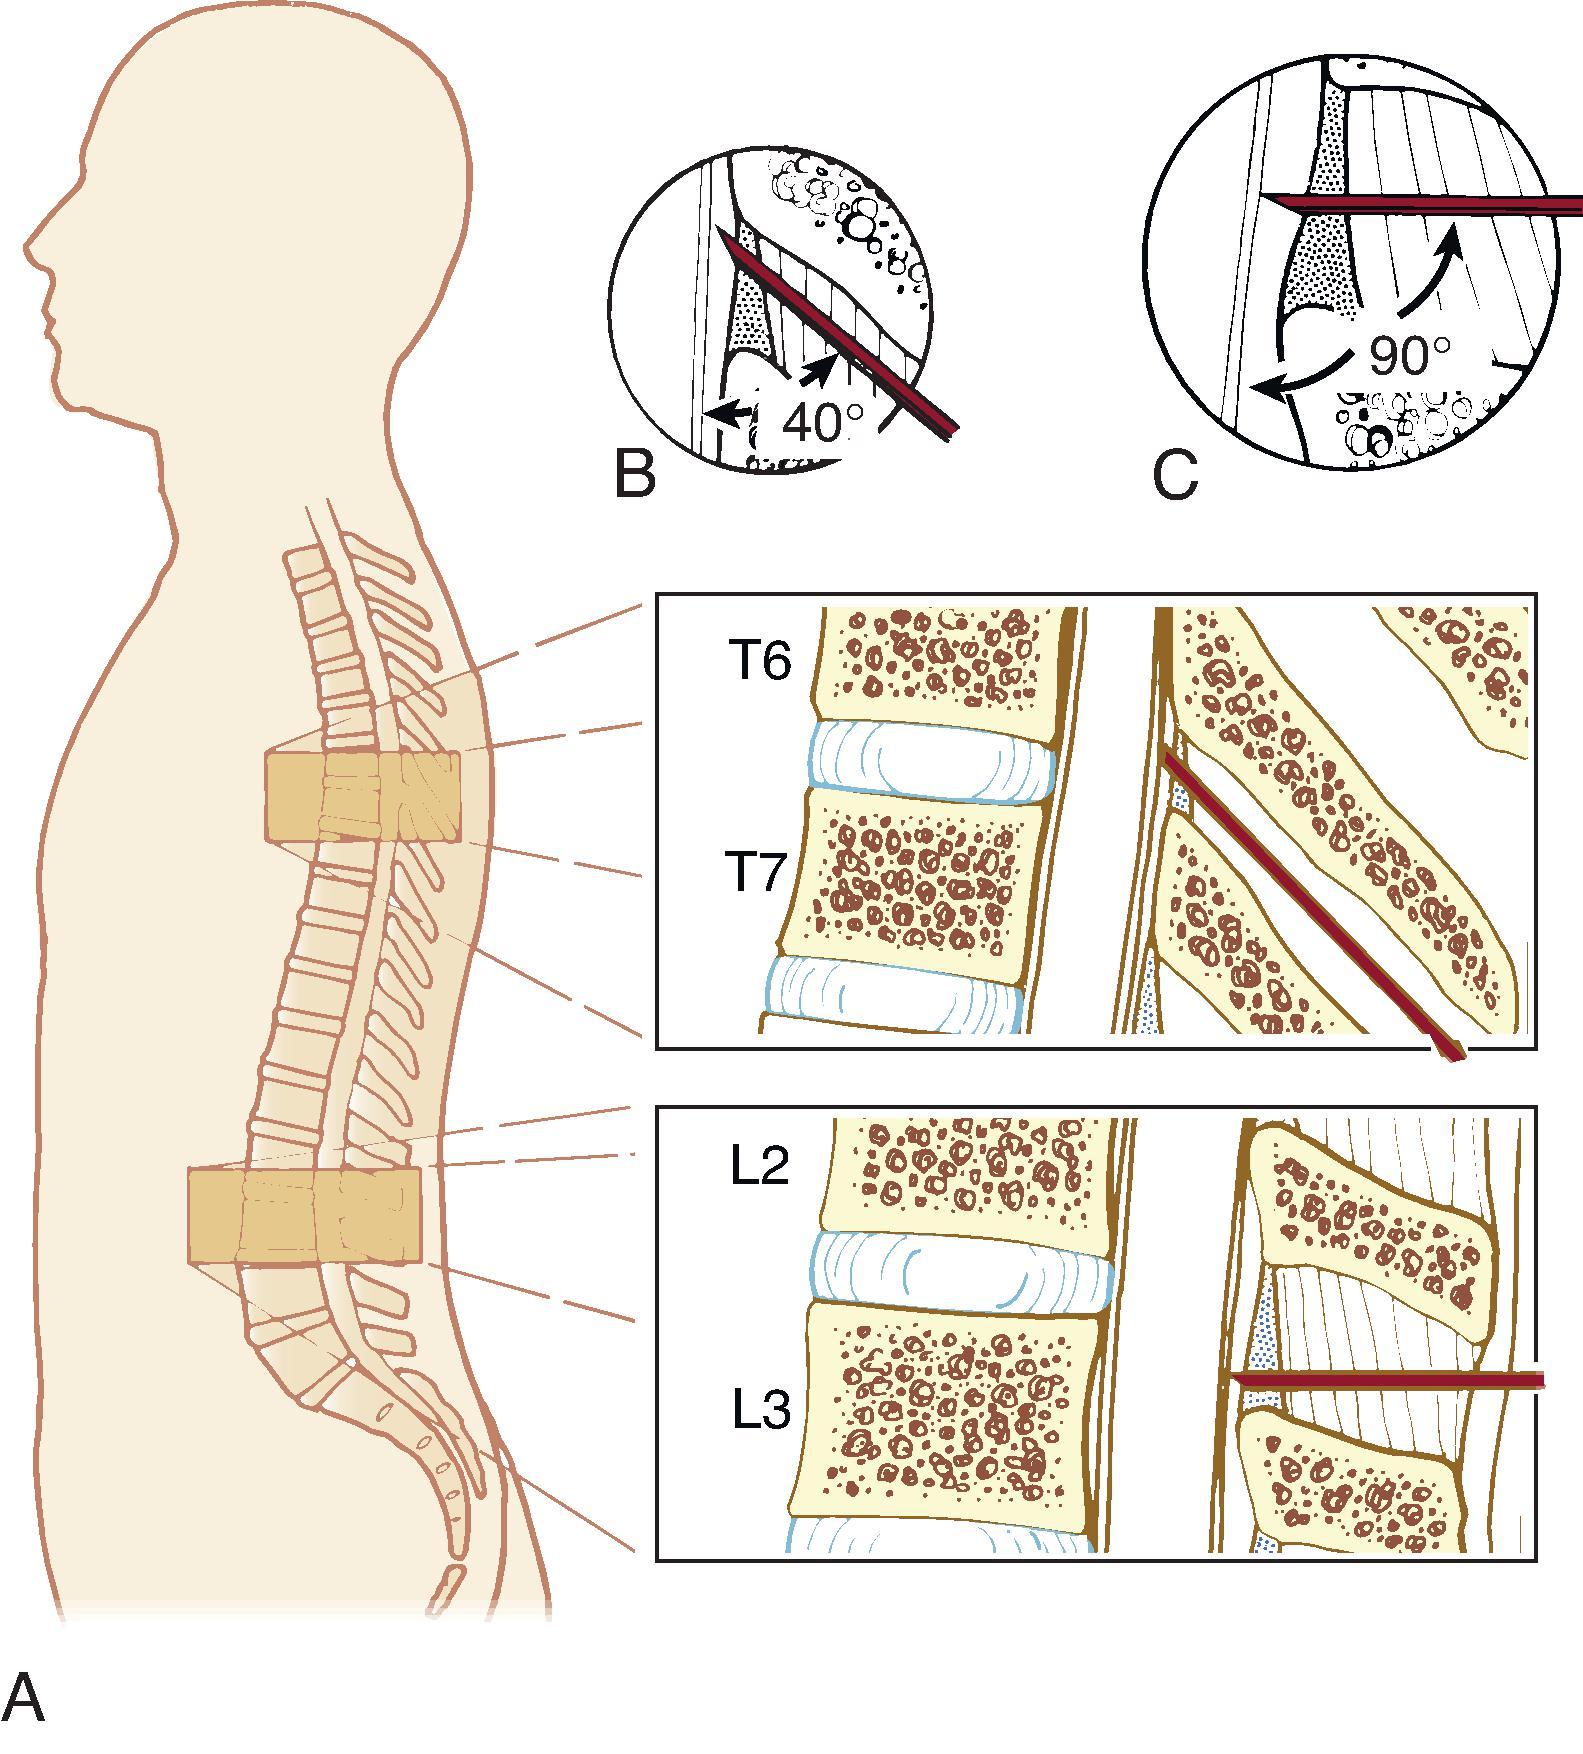 Fig. 17.5, Lumbar and thoracic epidural technique. The cephalad (acute) angle of needle insertion during thoracic epidural cannulation may provide a slightly longer distance of “needle travel” before entering the epidural space (A). In contrast, during lumbar epidural cannulation (B) the distance traveled is modified by a more perpendicular angle of needle insertion (C). (From Brull R, Macfarlane AJR, Chan VWS. Spinal, epidural and caudal anesthesia. In Miller RD, Cohen NH, Eriksson LI, et al, eds. Miller's Anesthesia. 8th ed. Philadelphia: Saunders Elsevier; 2015:Fig. 56.9.)